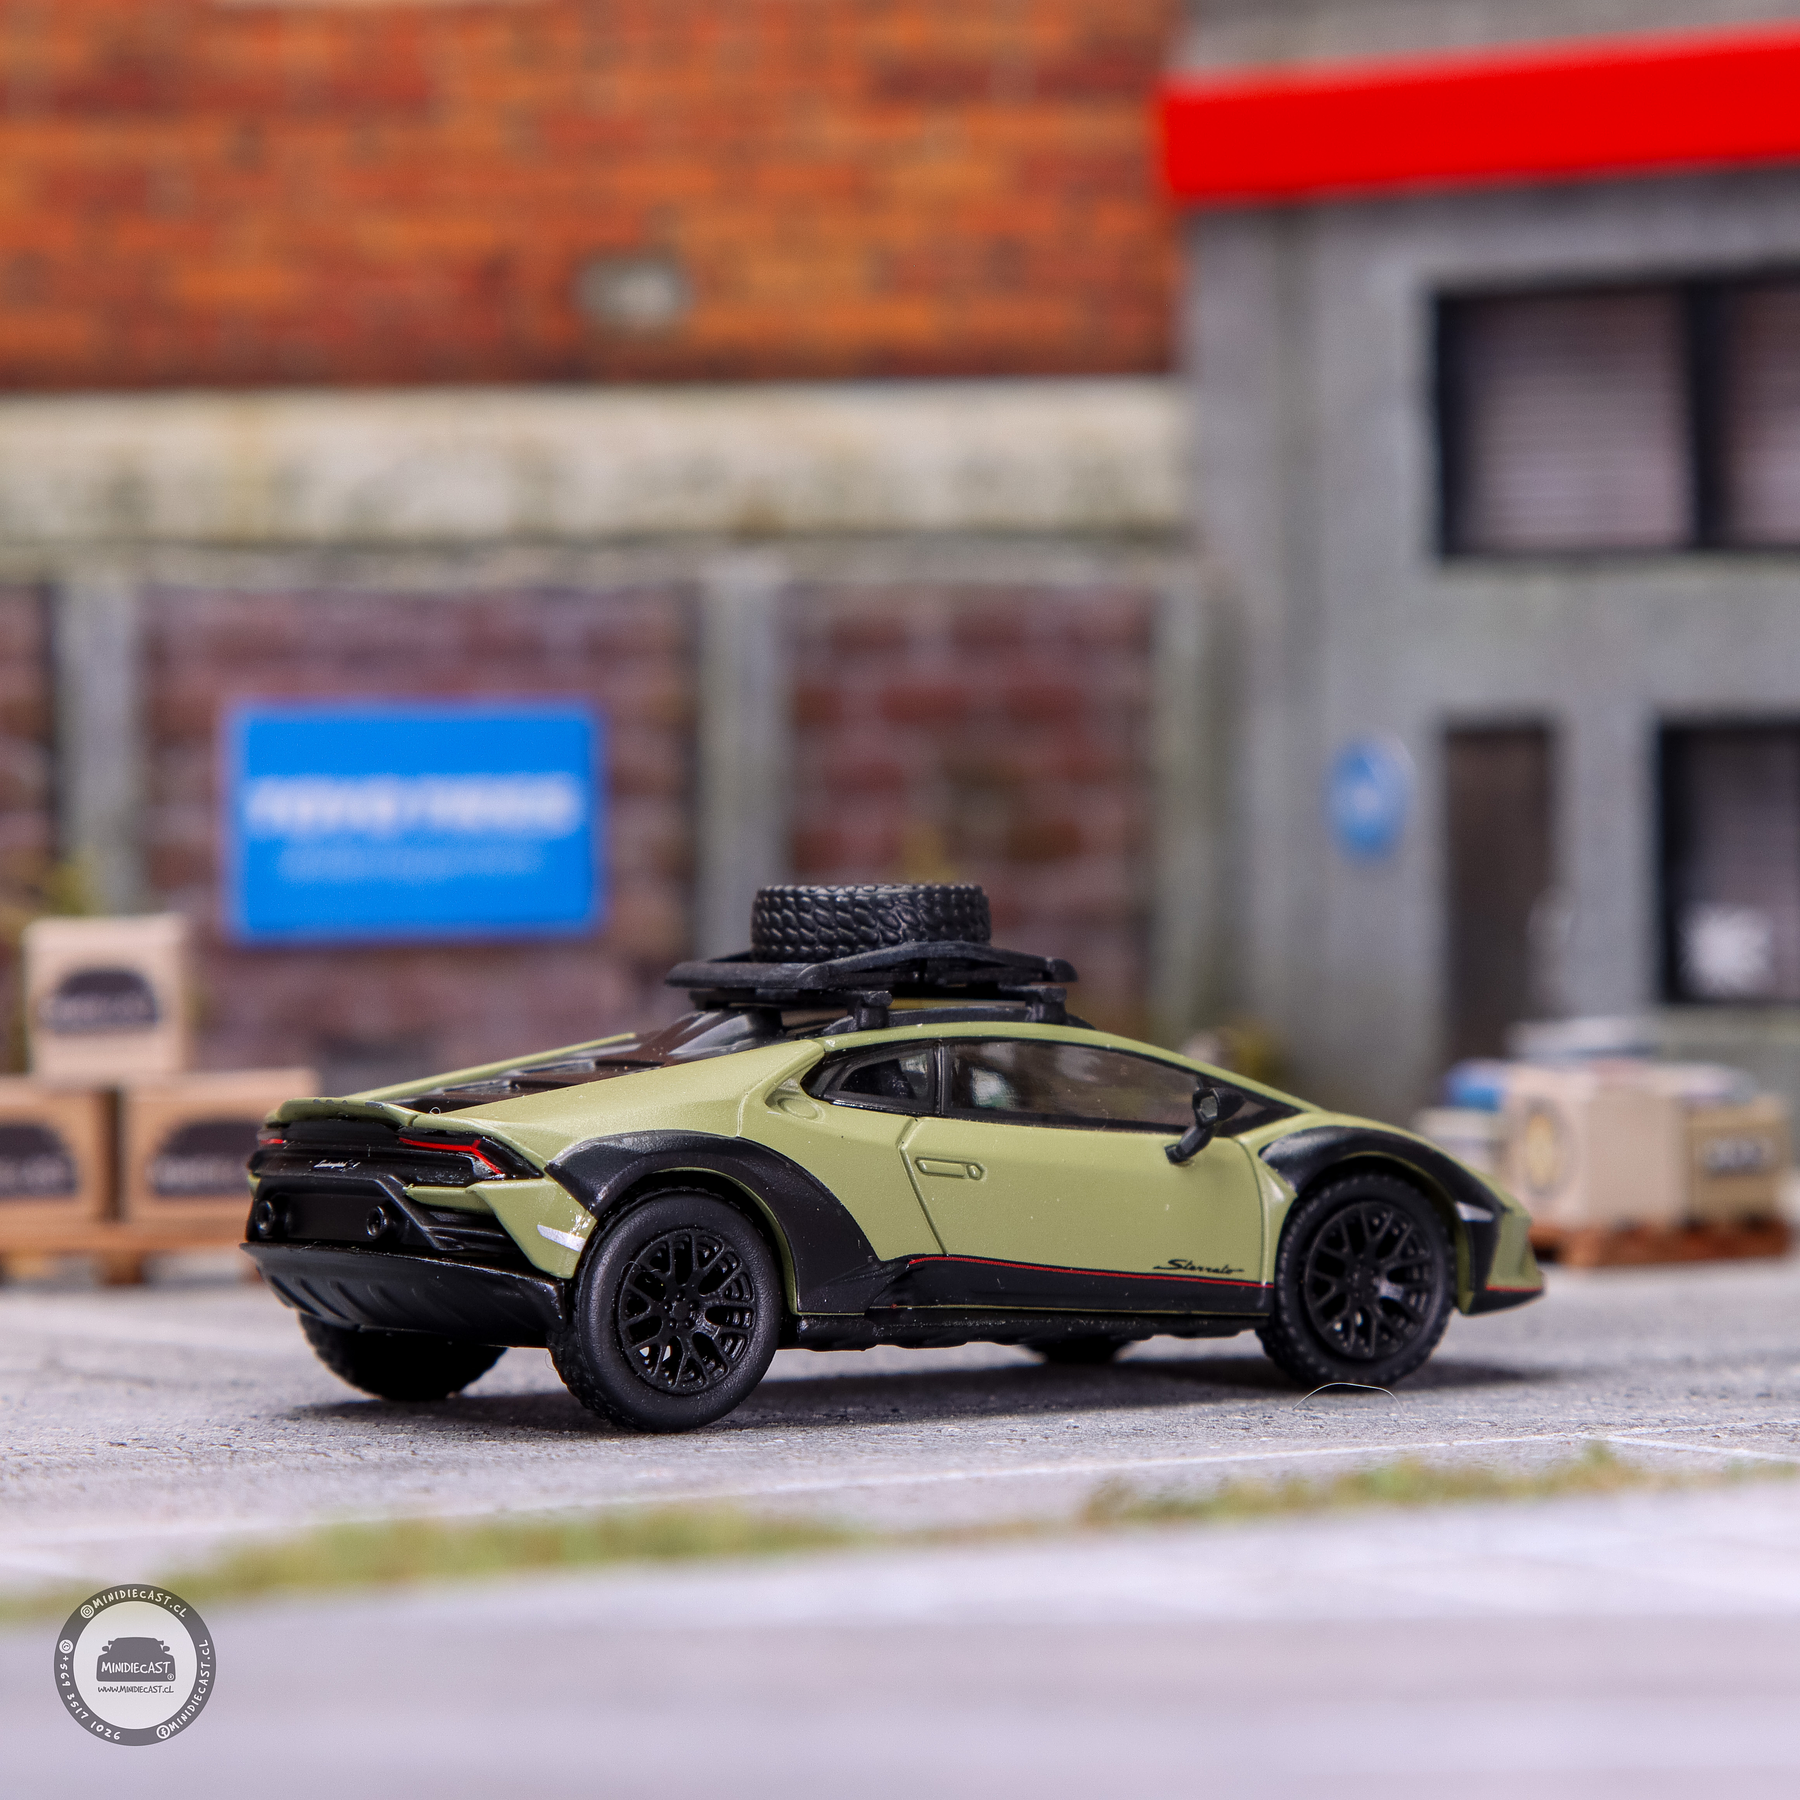 Sparky 1:64 Lamborghini Huracán Sterrato with a roof rack and a wheel - Green.